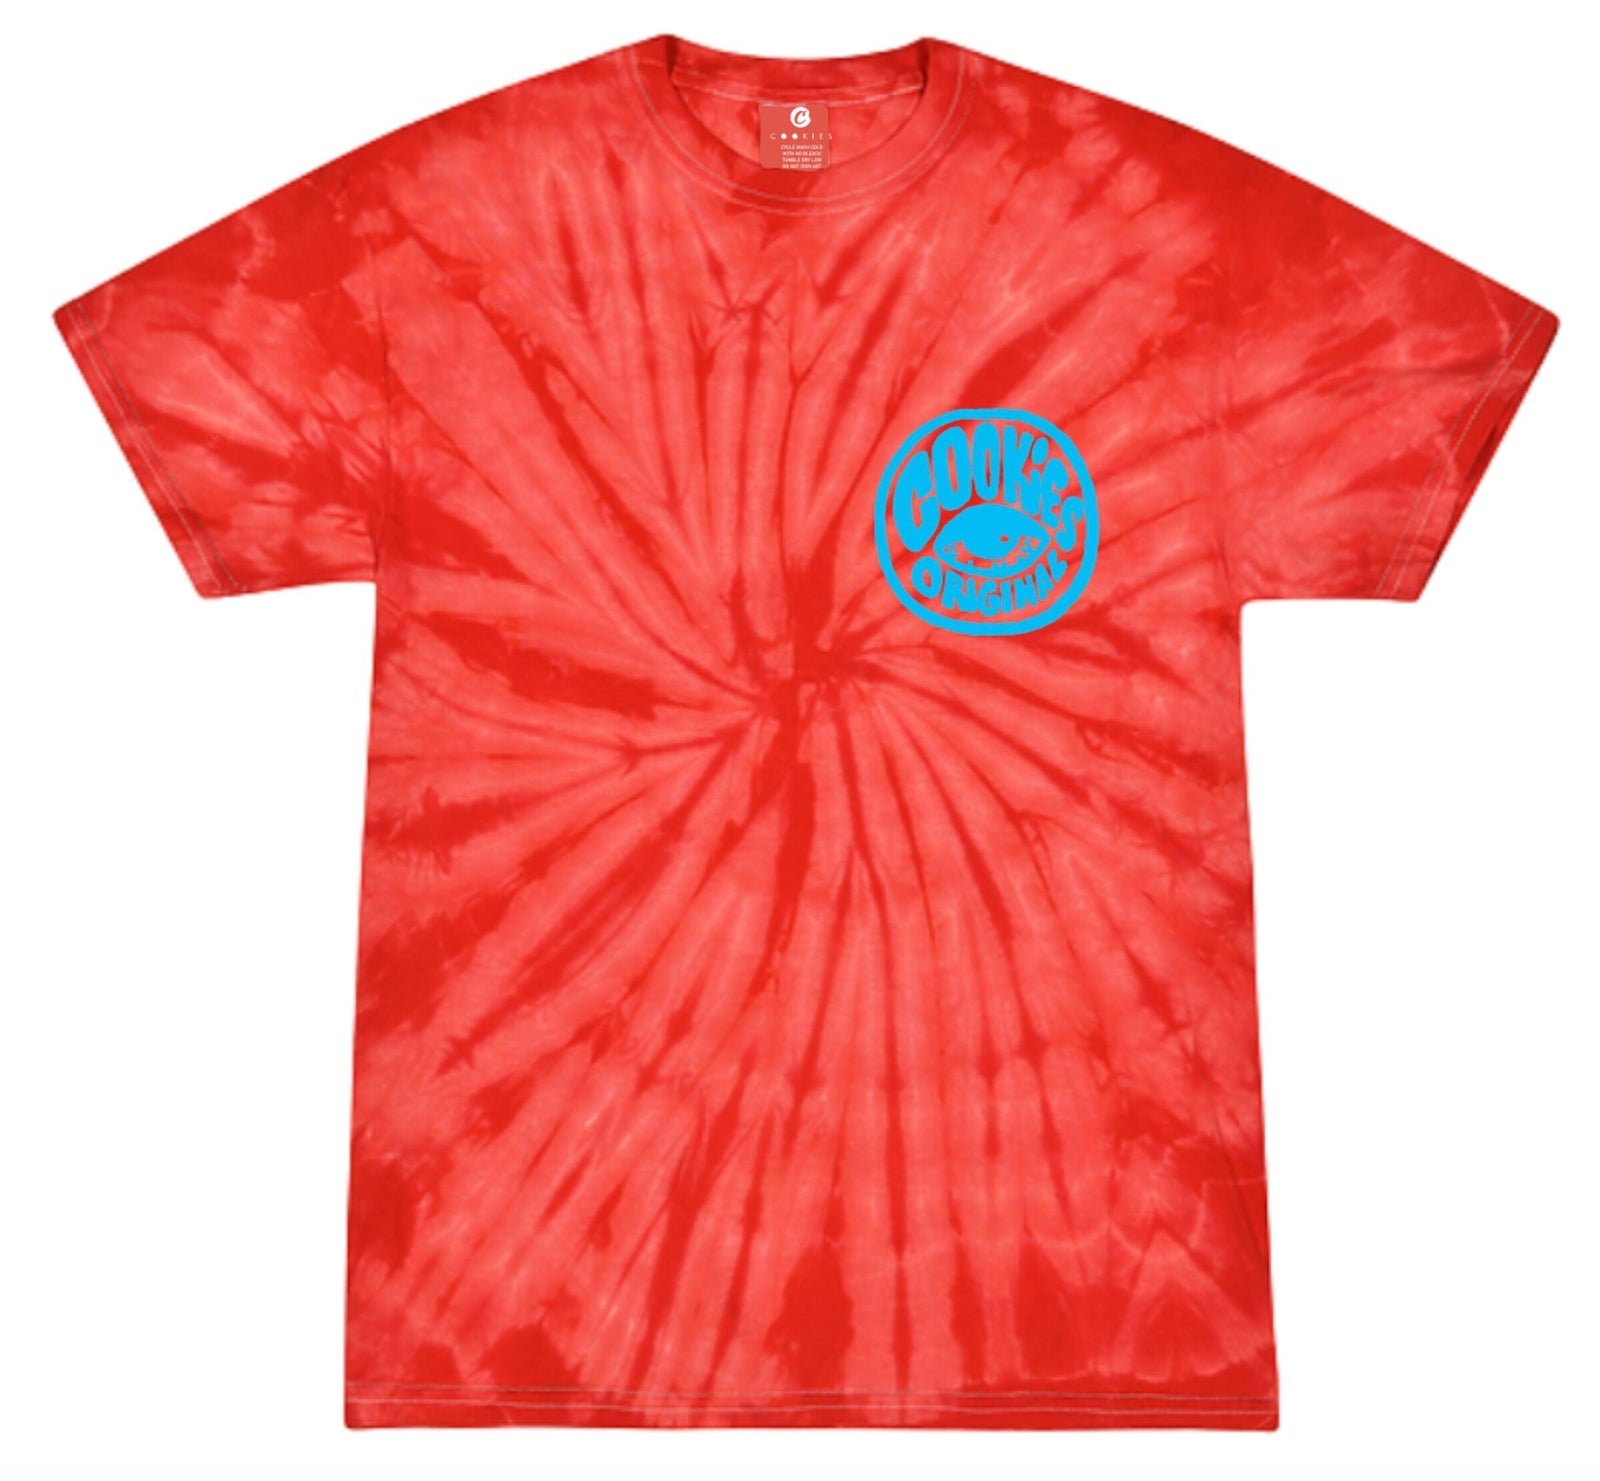 Cookies Get The Red Out Tee